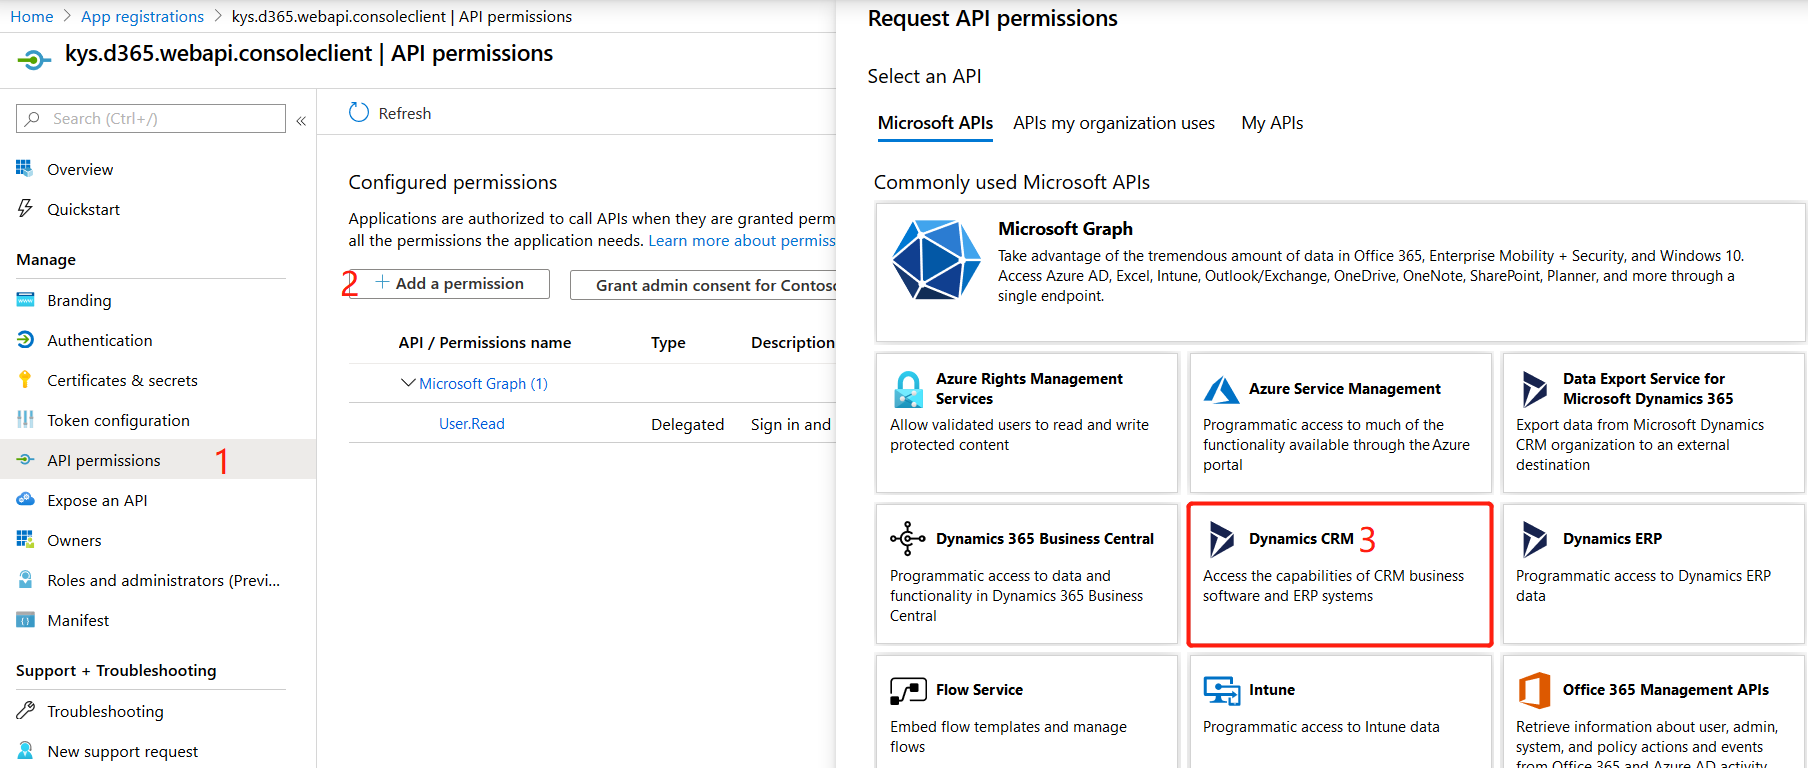 enable ad ds authentication for your azure file shares